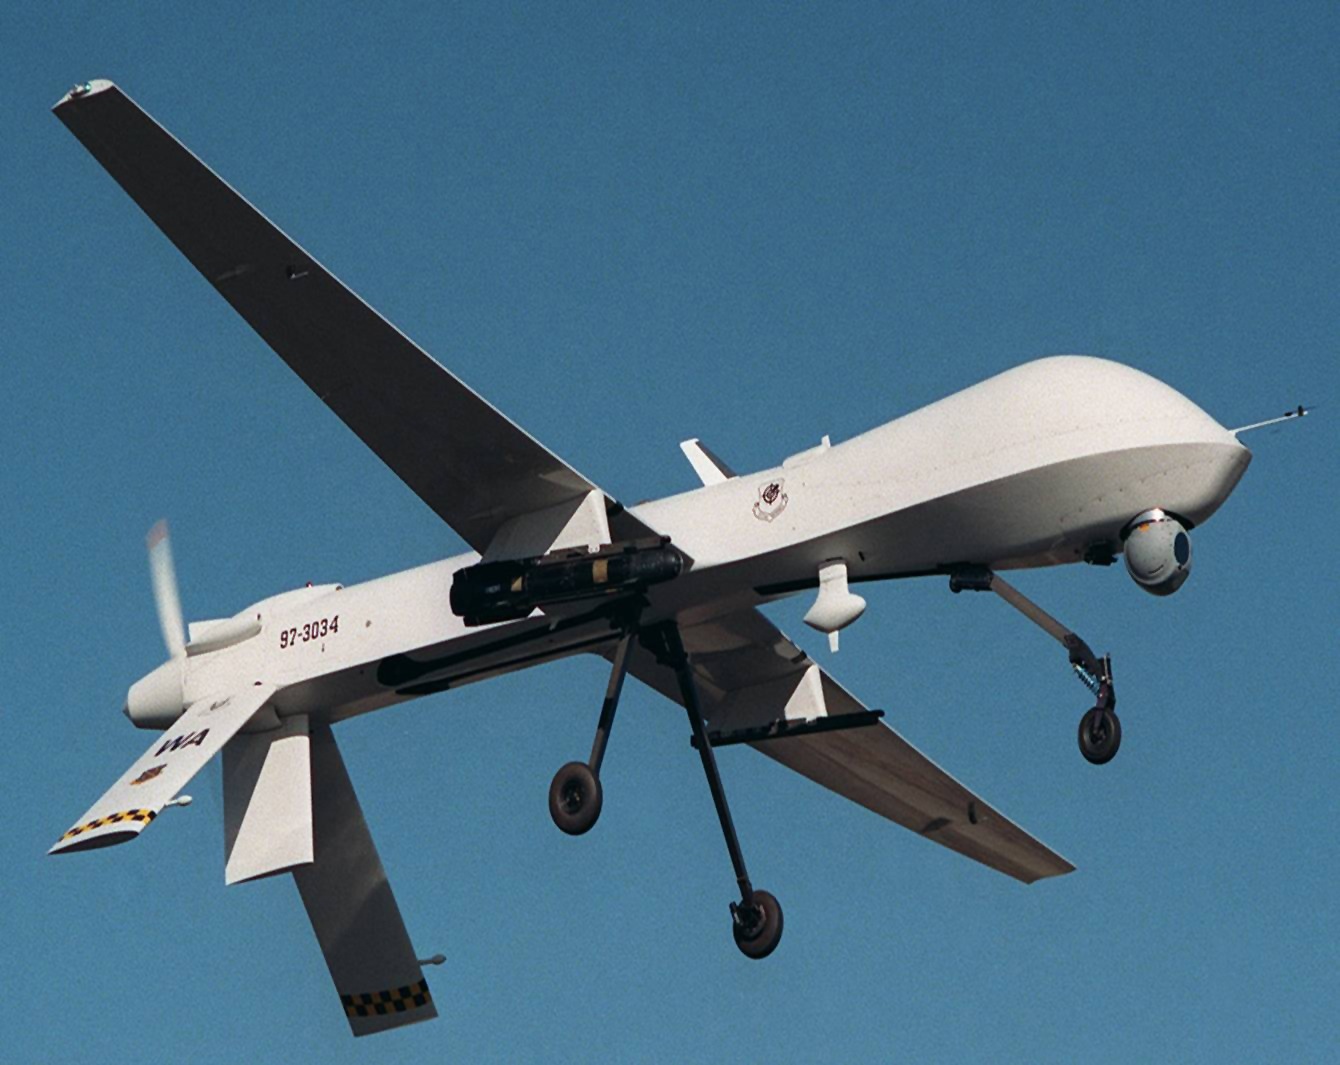 US Should Pull Drones From Missile Control Regime: Mitchell Institute